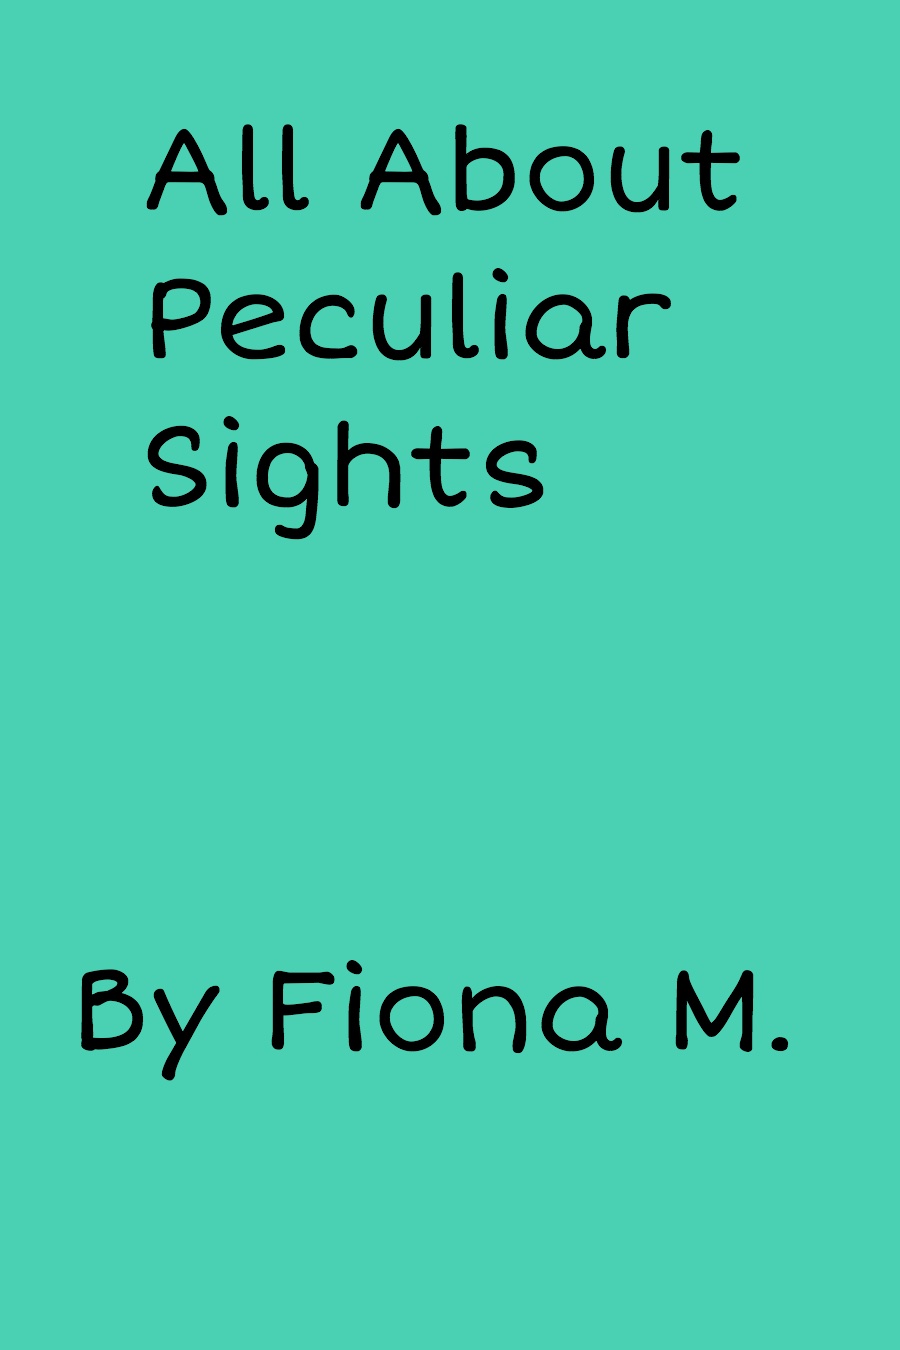 All About Peculiar Sights by Fiona M